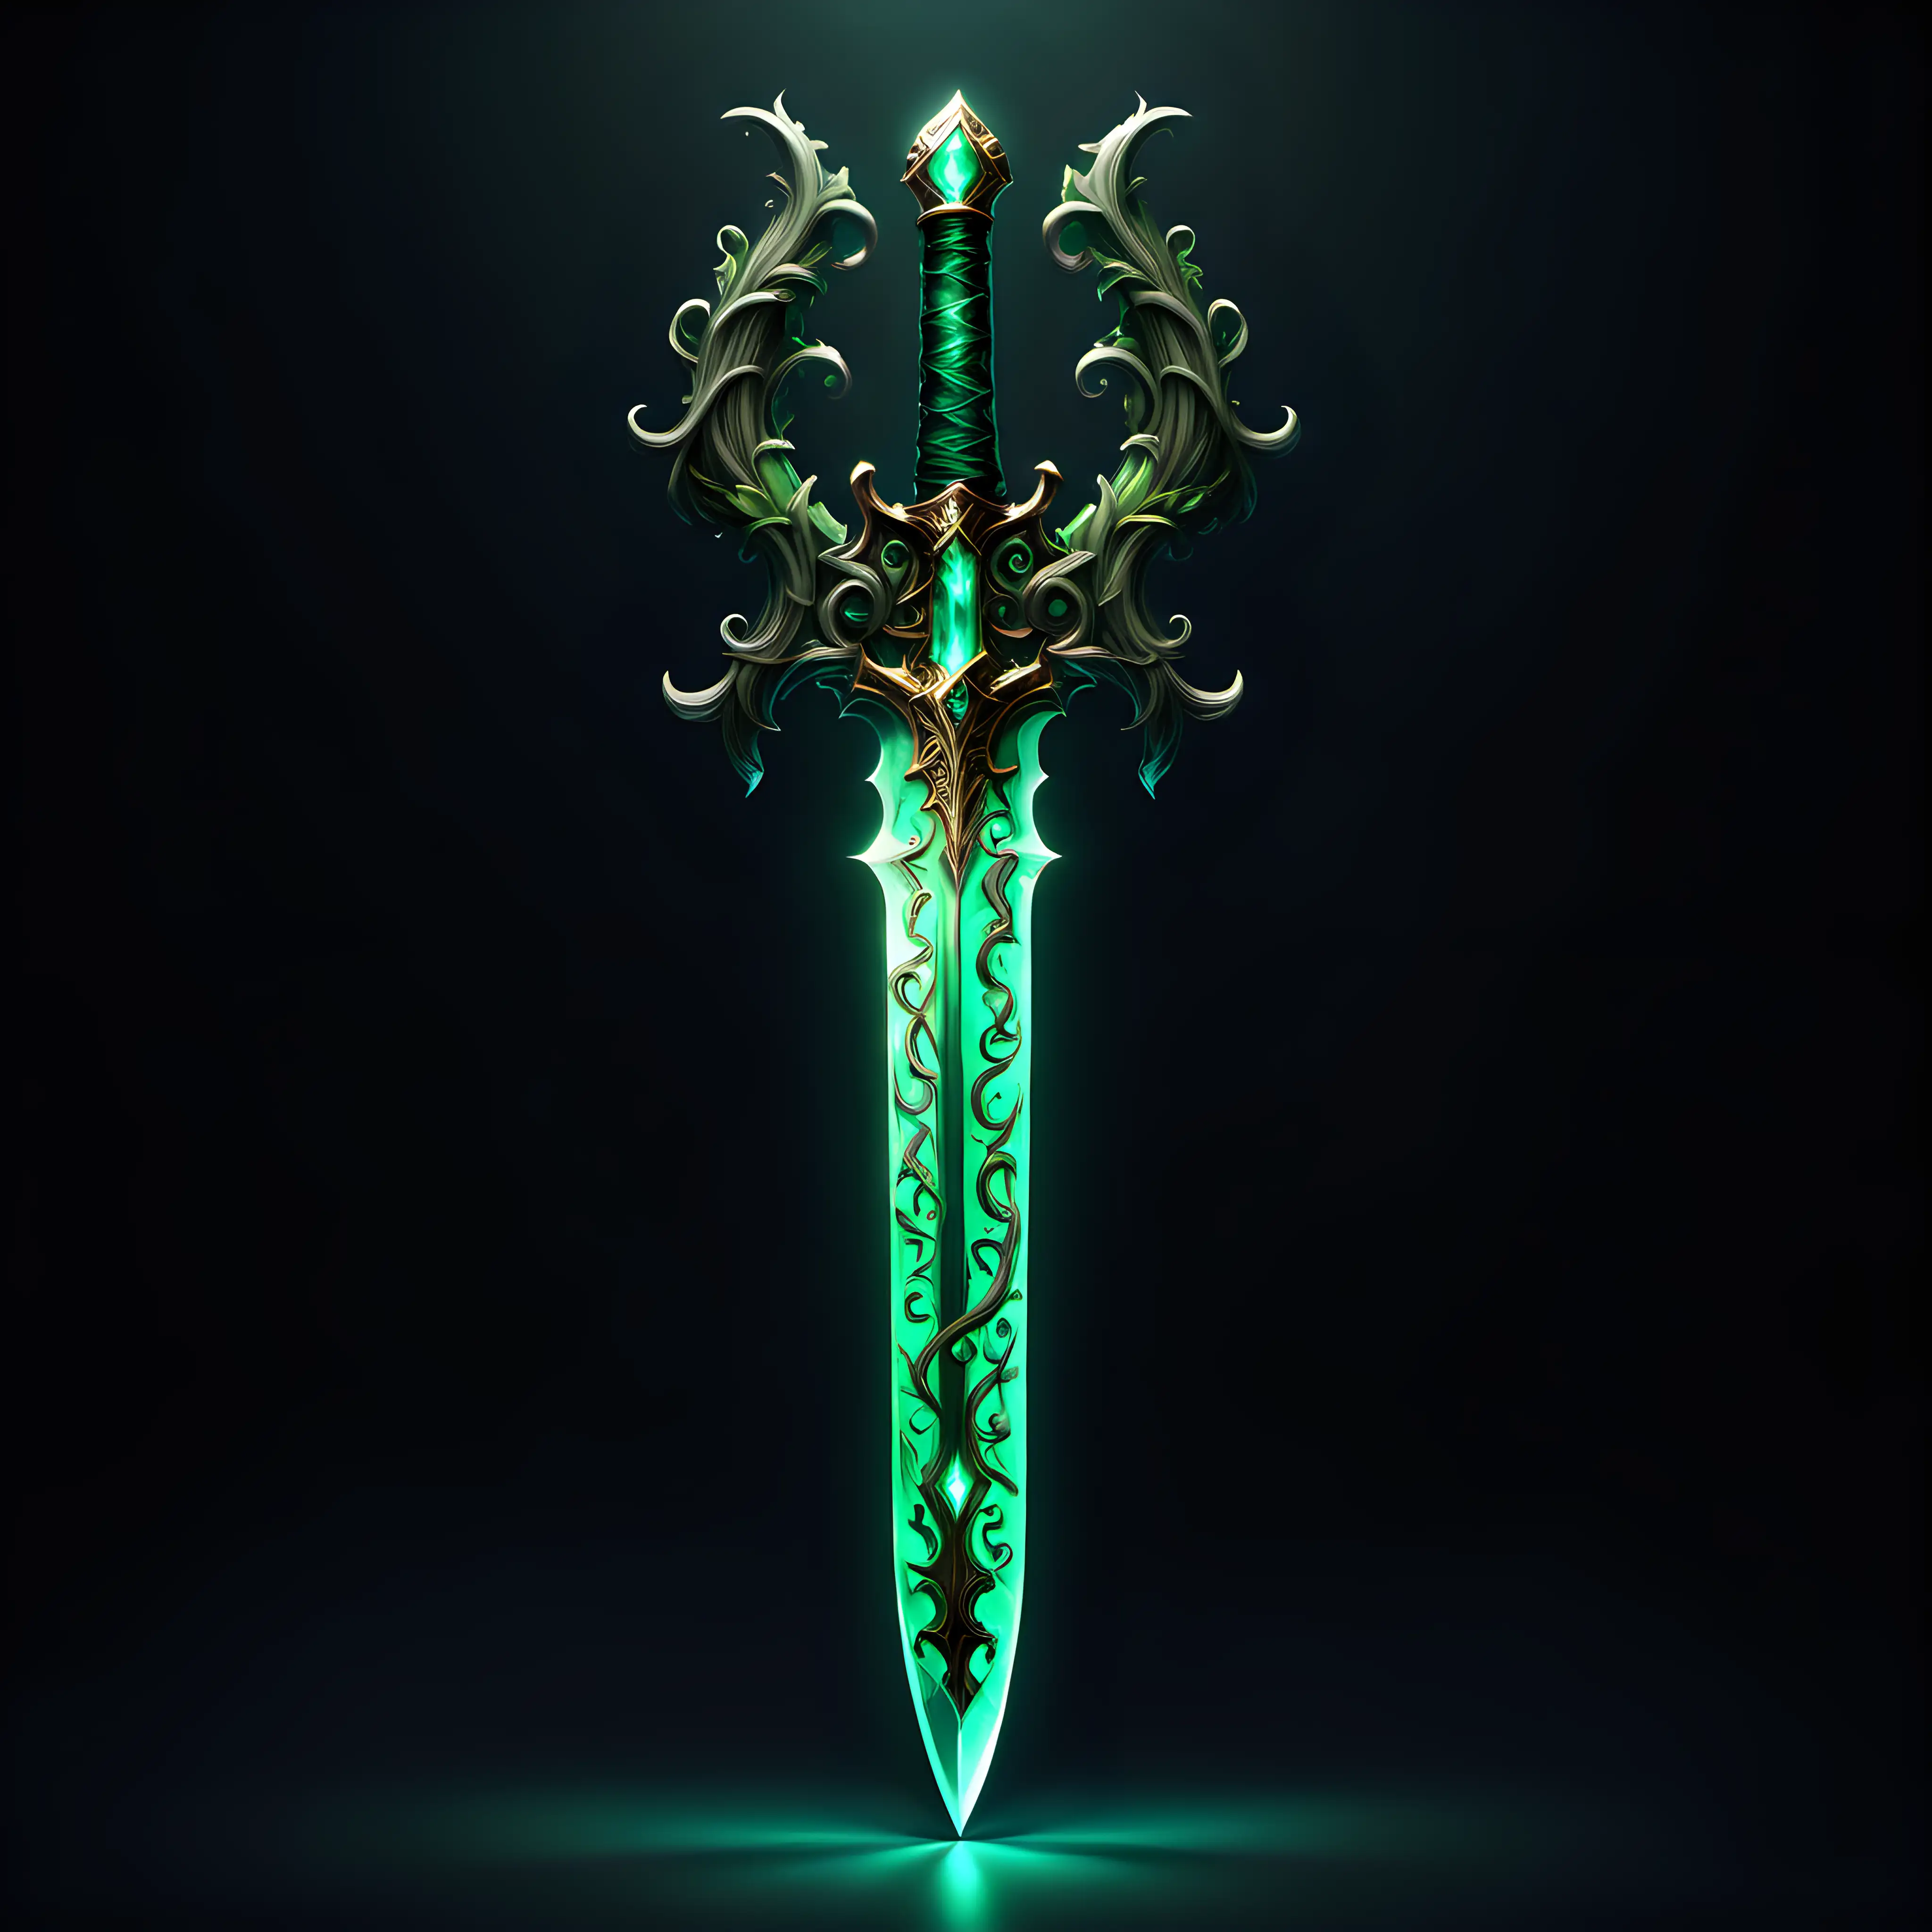 A luminous emerald sword with a hand guard made of vines